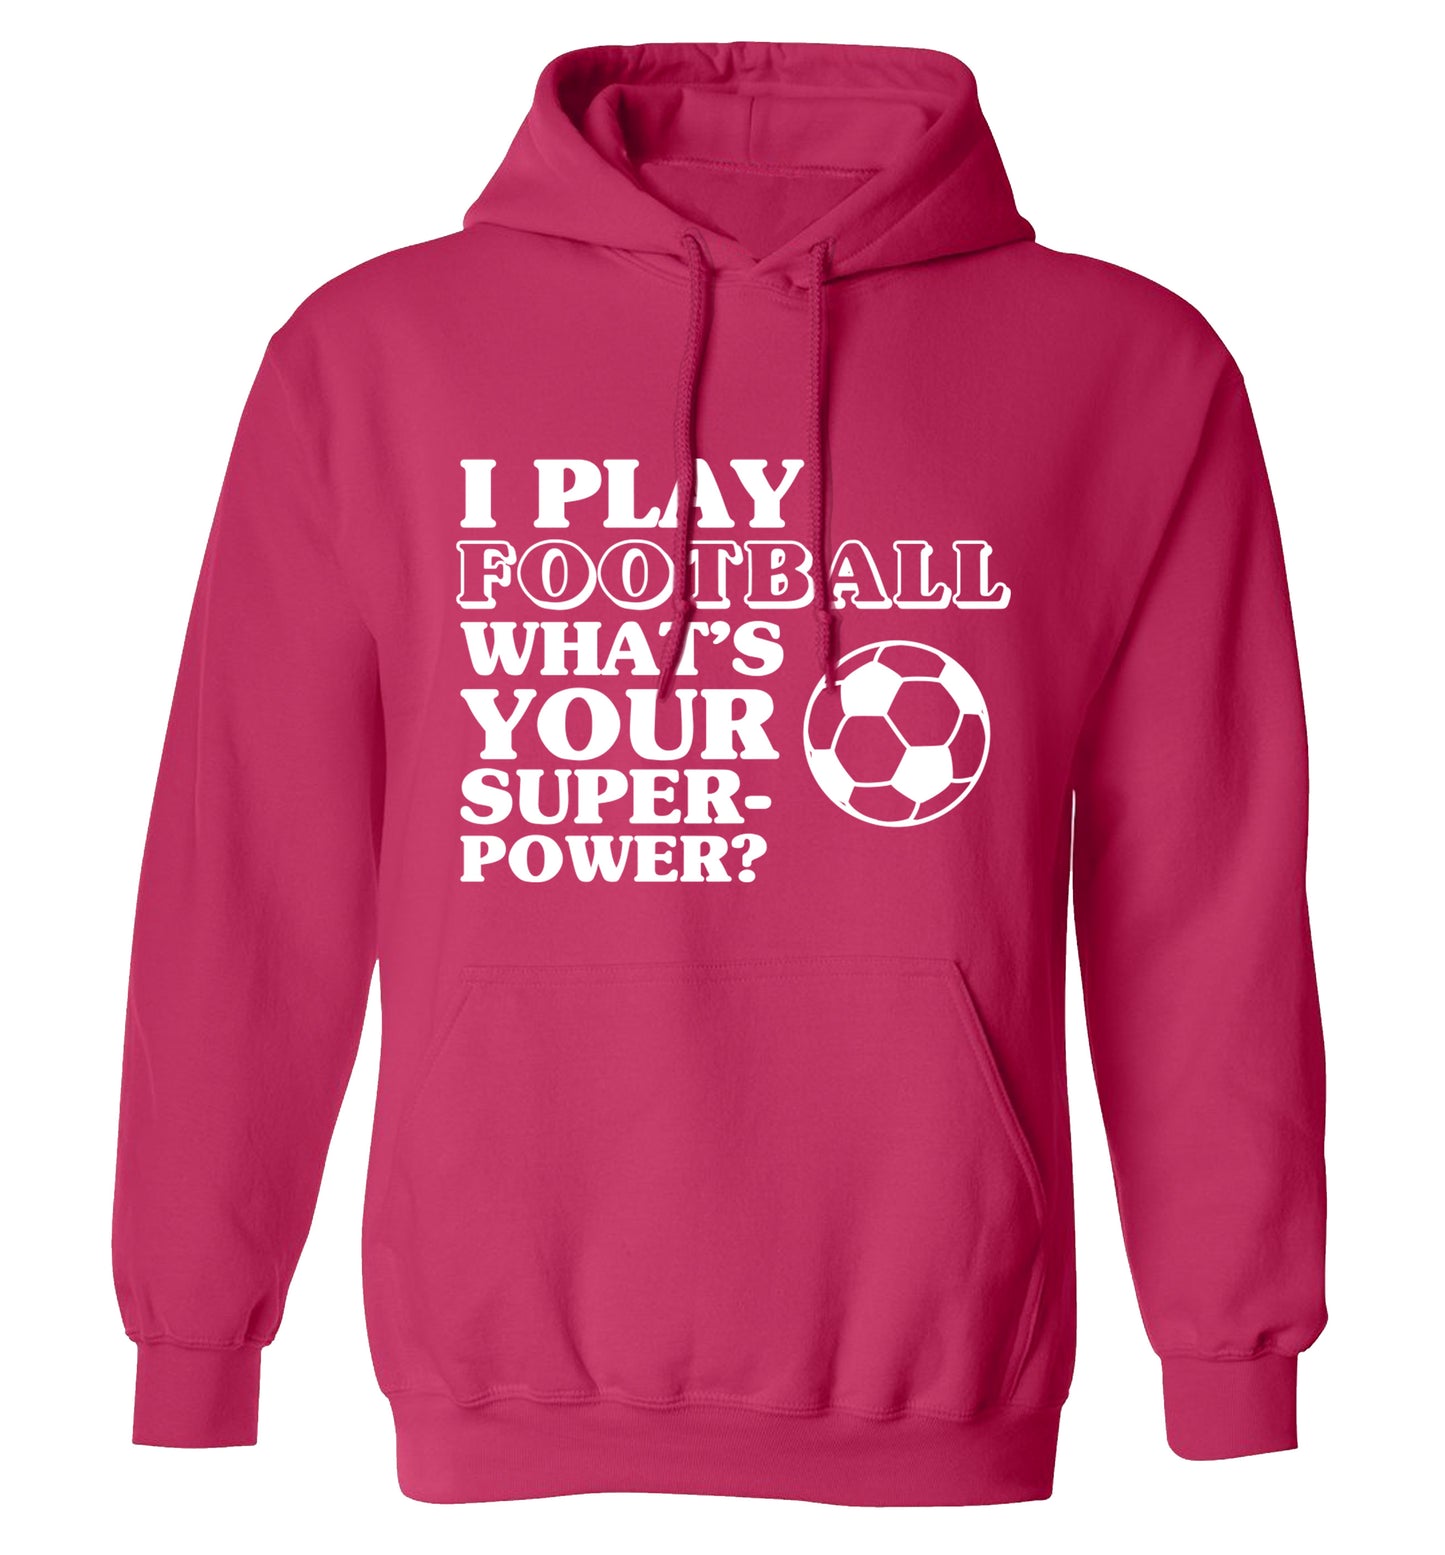 I play football what's your superpower? adults unisexpink hoodie 2XL